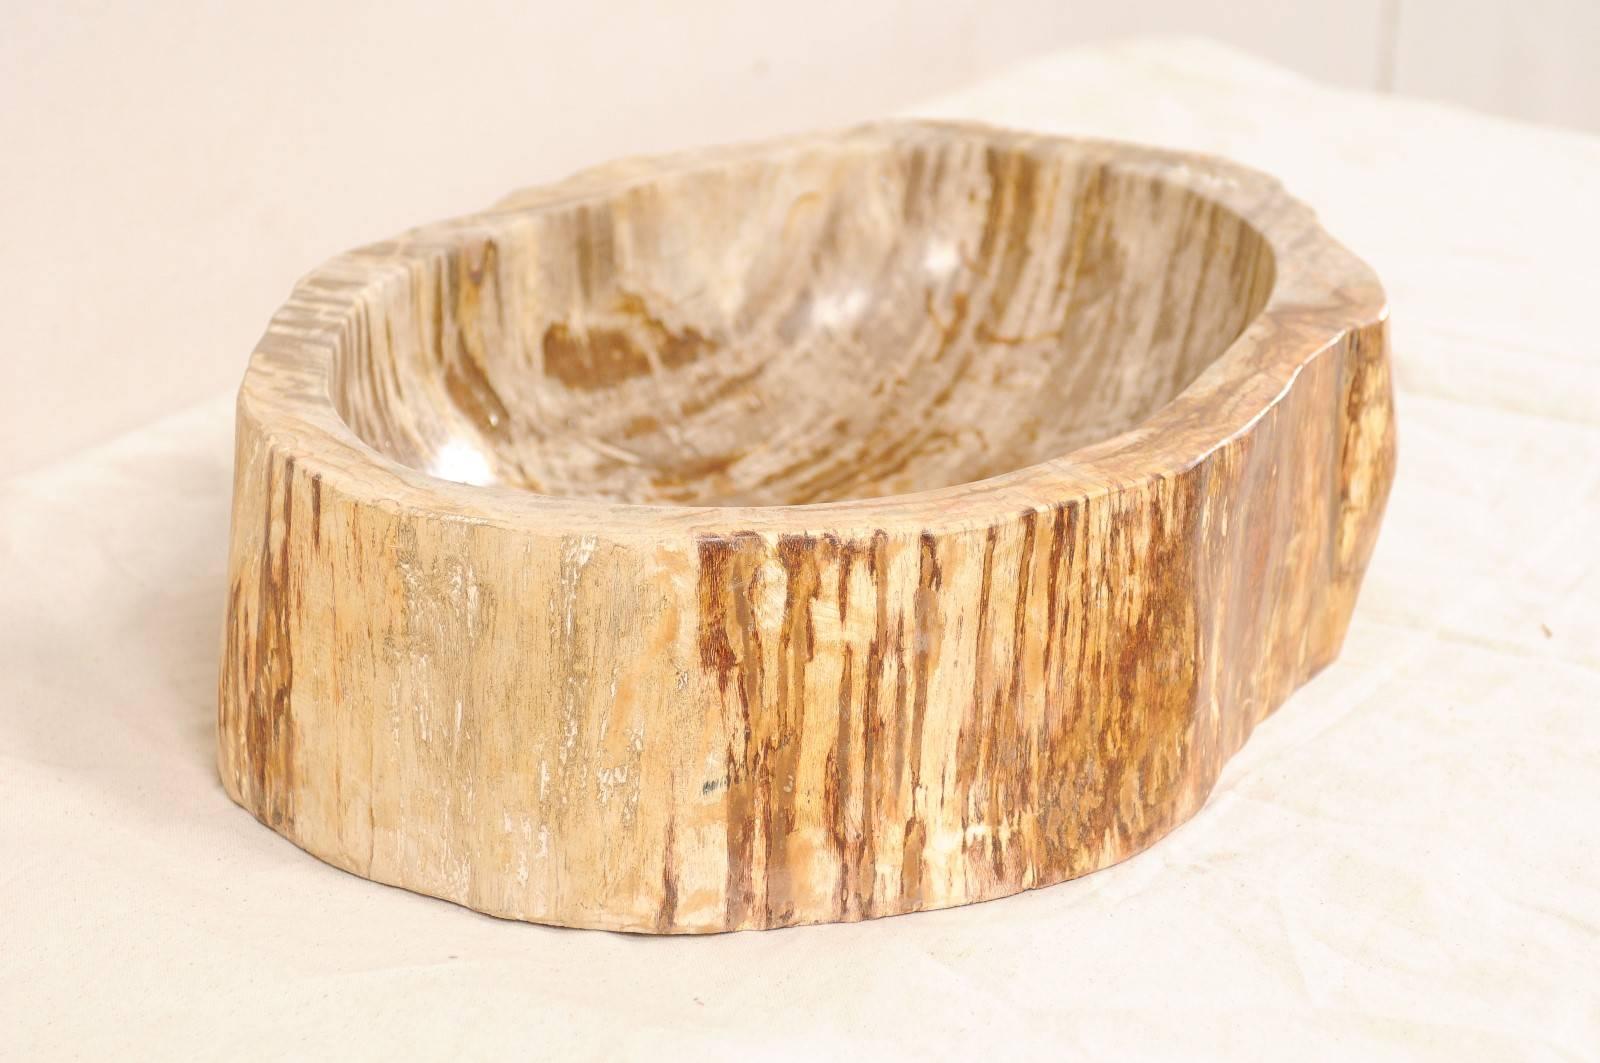 A petrified wood sink. This oval-shaped petrified wood sink has primary colors in a taupe and beige, with richer brown and rust tones. While the interior of the bowl has been polished, the surround has been left unpolished. Petrified wood is the